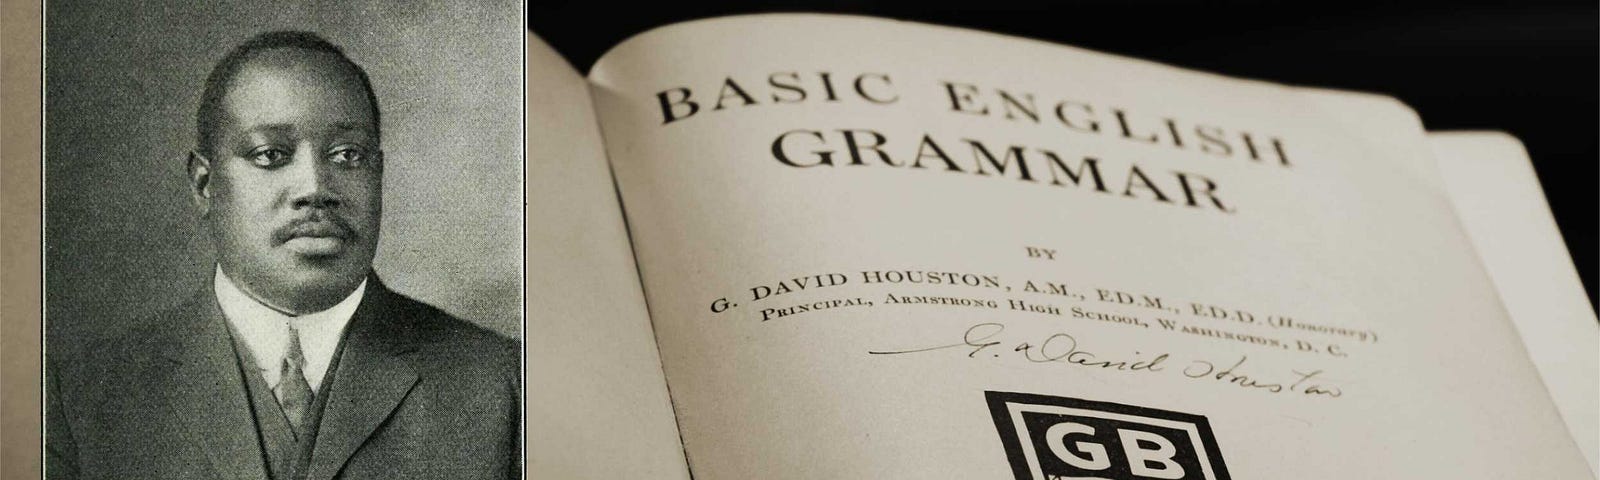 Old photograph of Gordon David Houston beside a close-up of the book, “Basic English Grammar”.